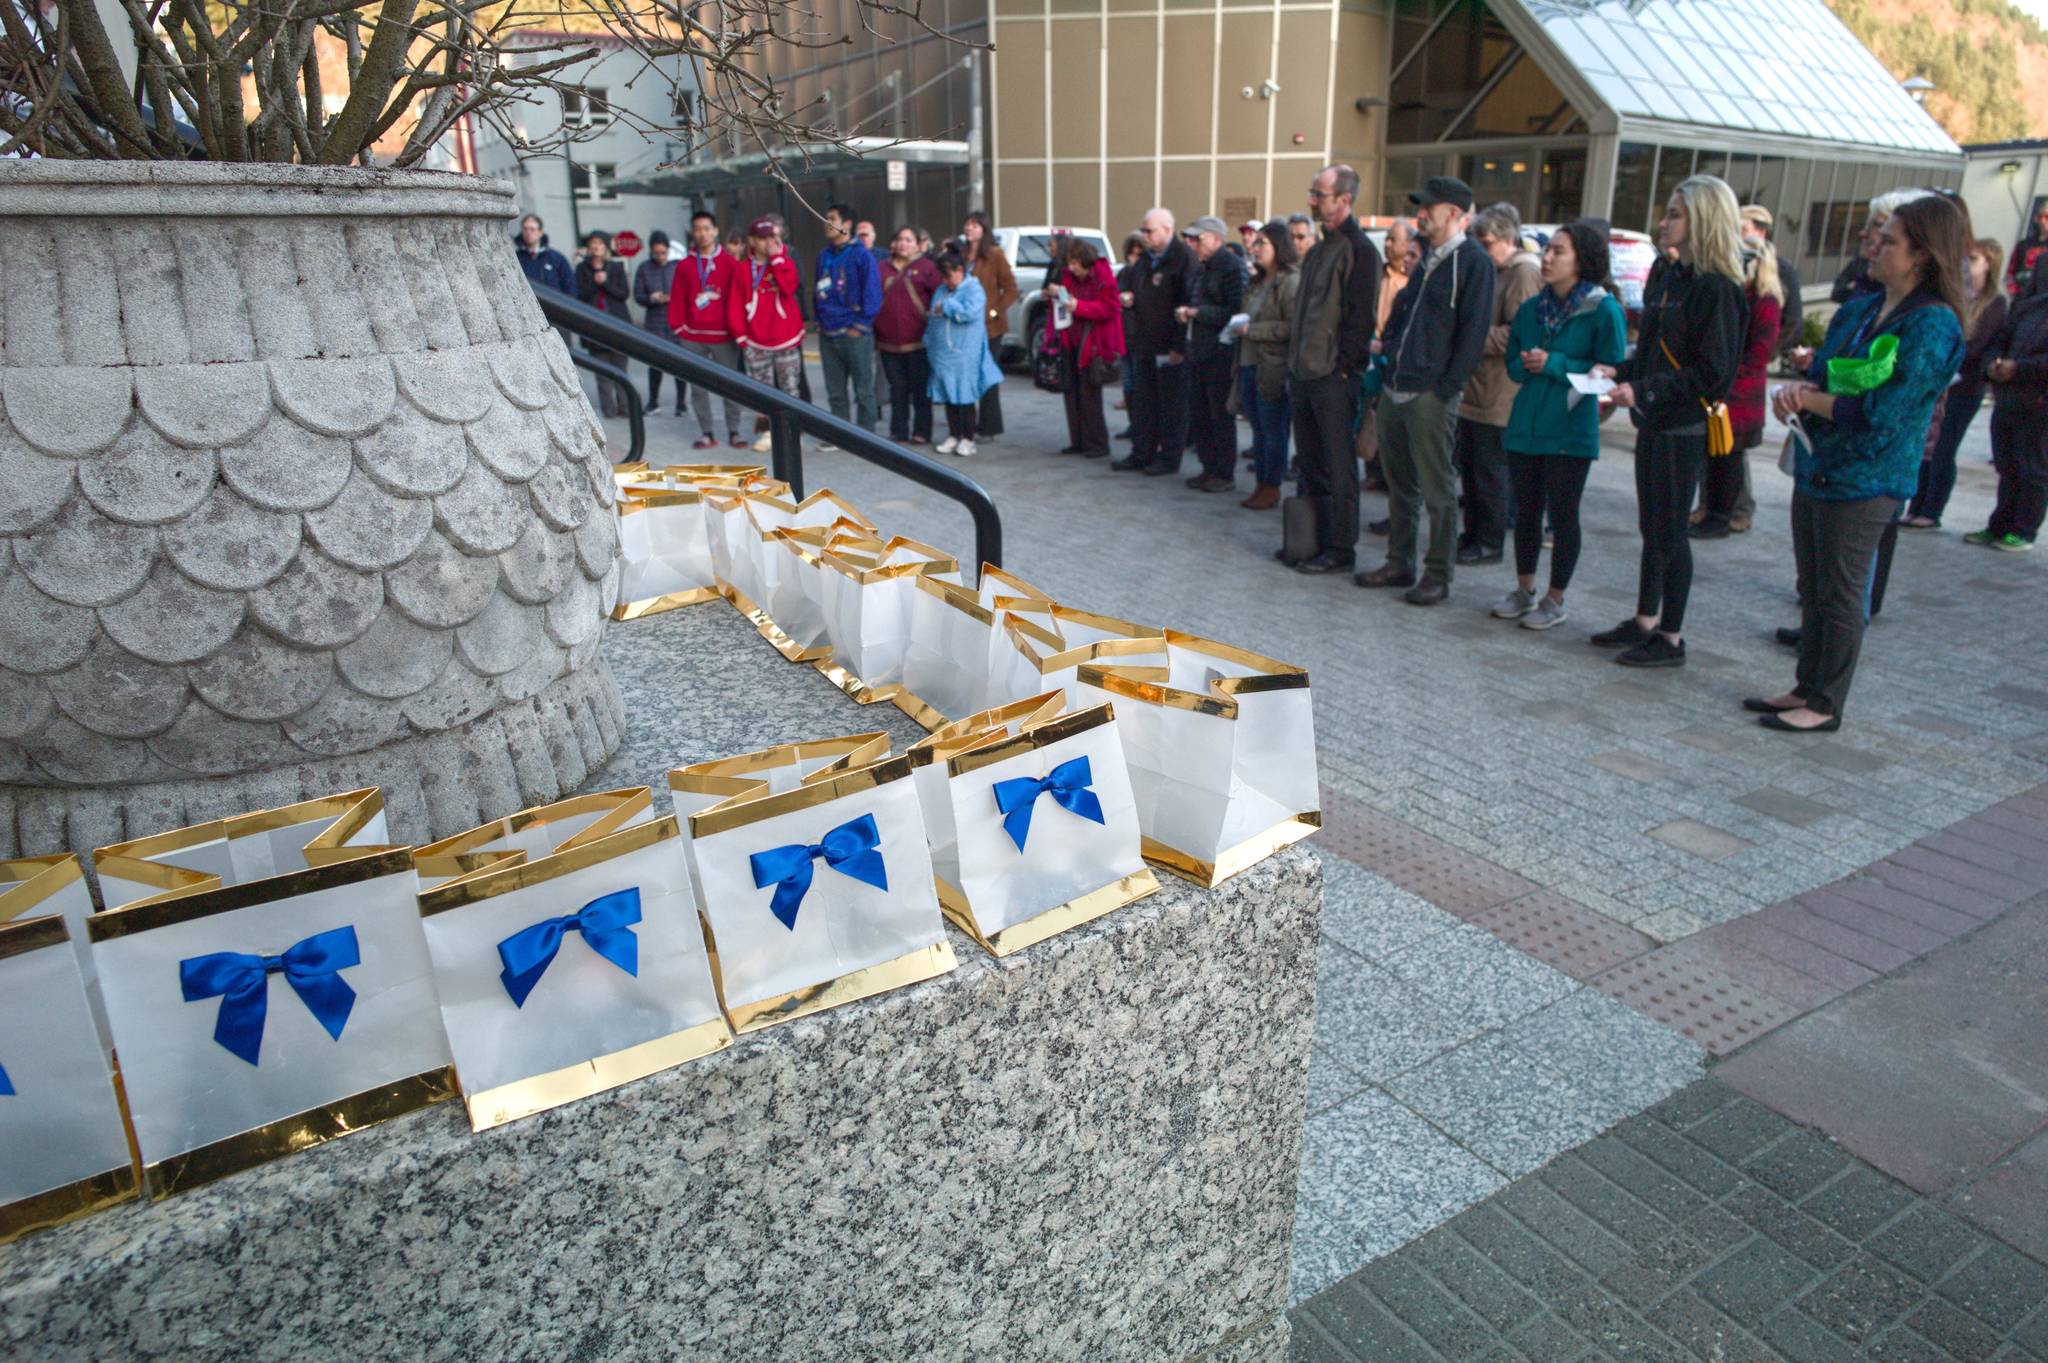 Two hundred bags with electric candles decorate a candlelight vigil on the steps of the Capitol to raise awareness for suicide prevention on Tuesday, March 26, 2019. The decorated bags represent the 200 suicide death in Alaska in 2017. The event was hosted by the AFSP Alaska Chapter, the Alaska Statewide Suicide Prevention Council and the Juneau Suicide Prevention Council. (Michael Penn | Juneau Empire)